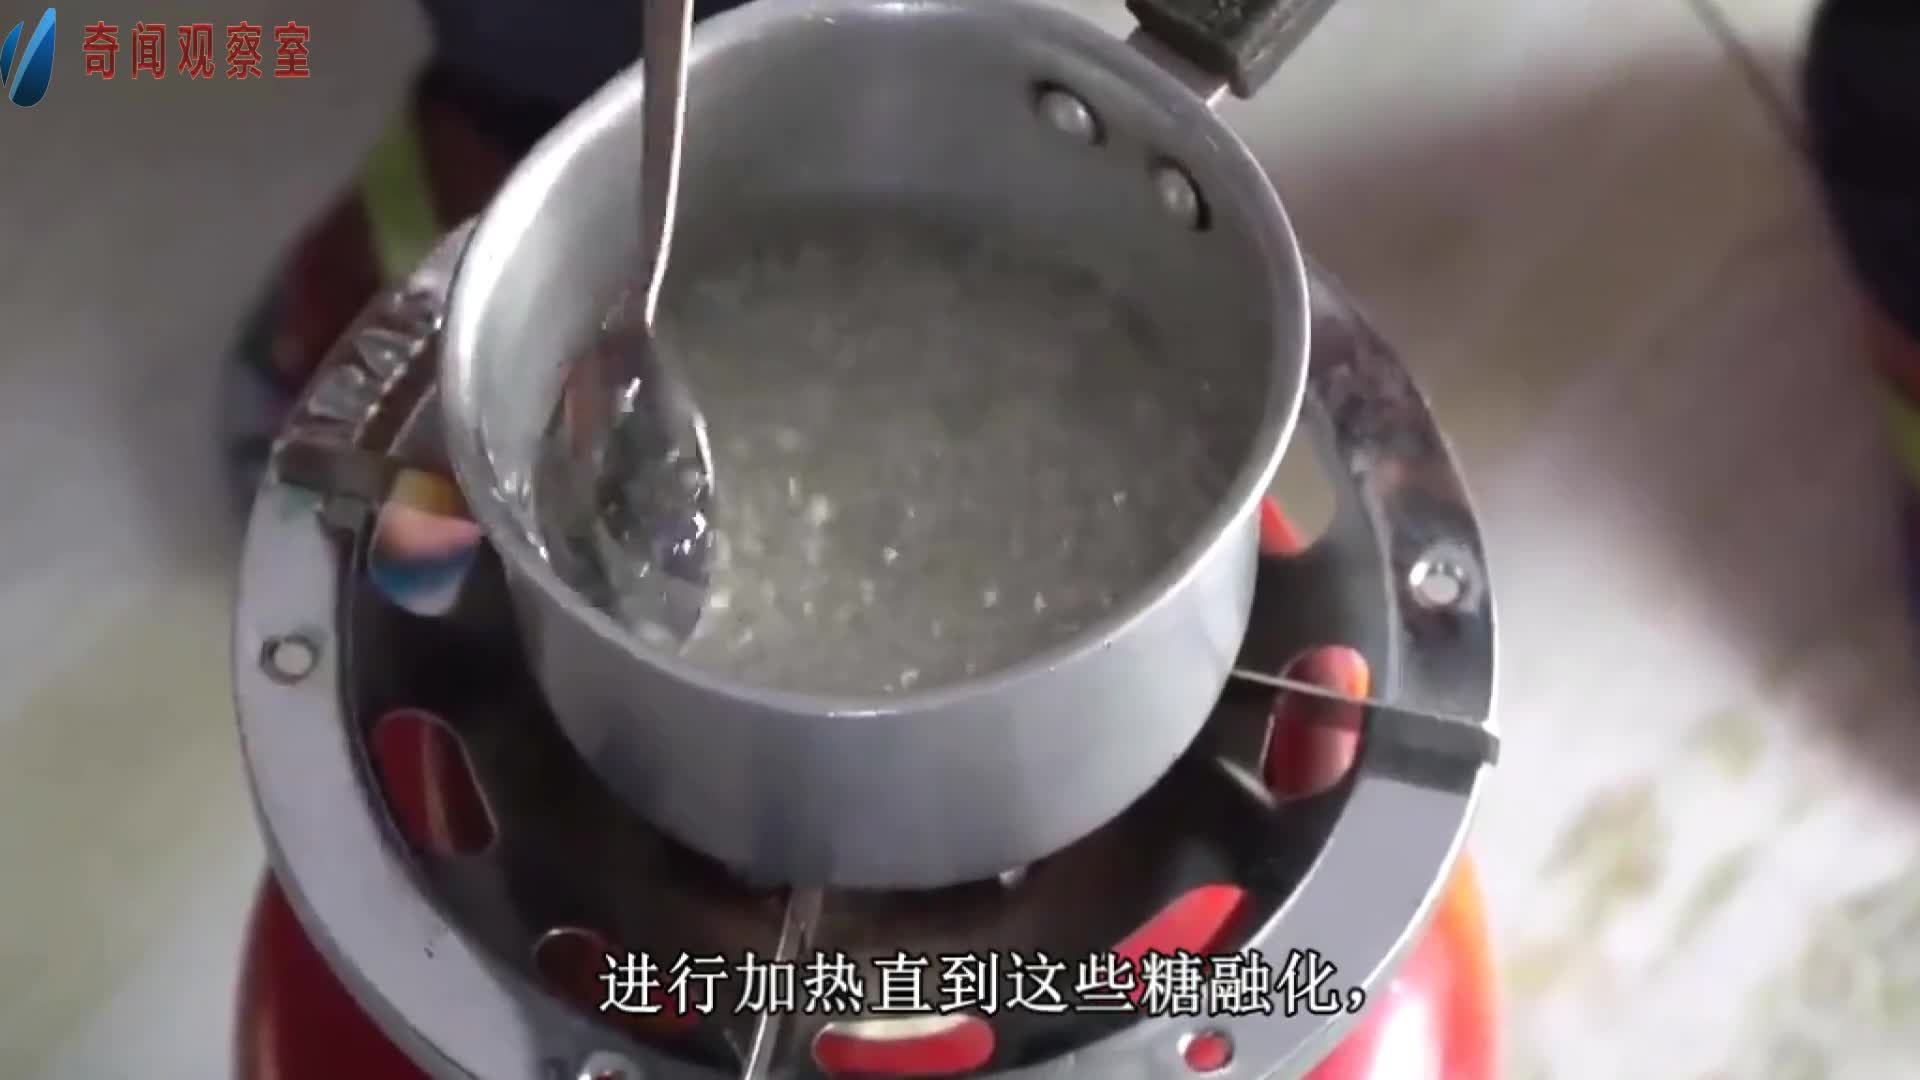 Little brother at home DIY cotton candy machine, making simple and convenient.